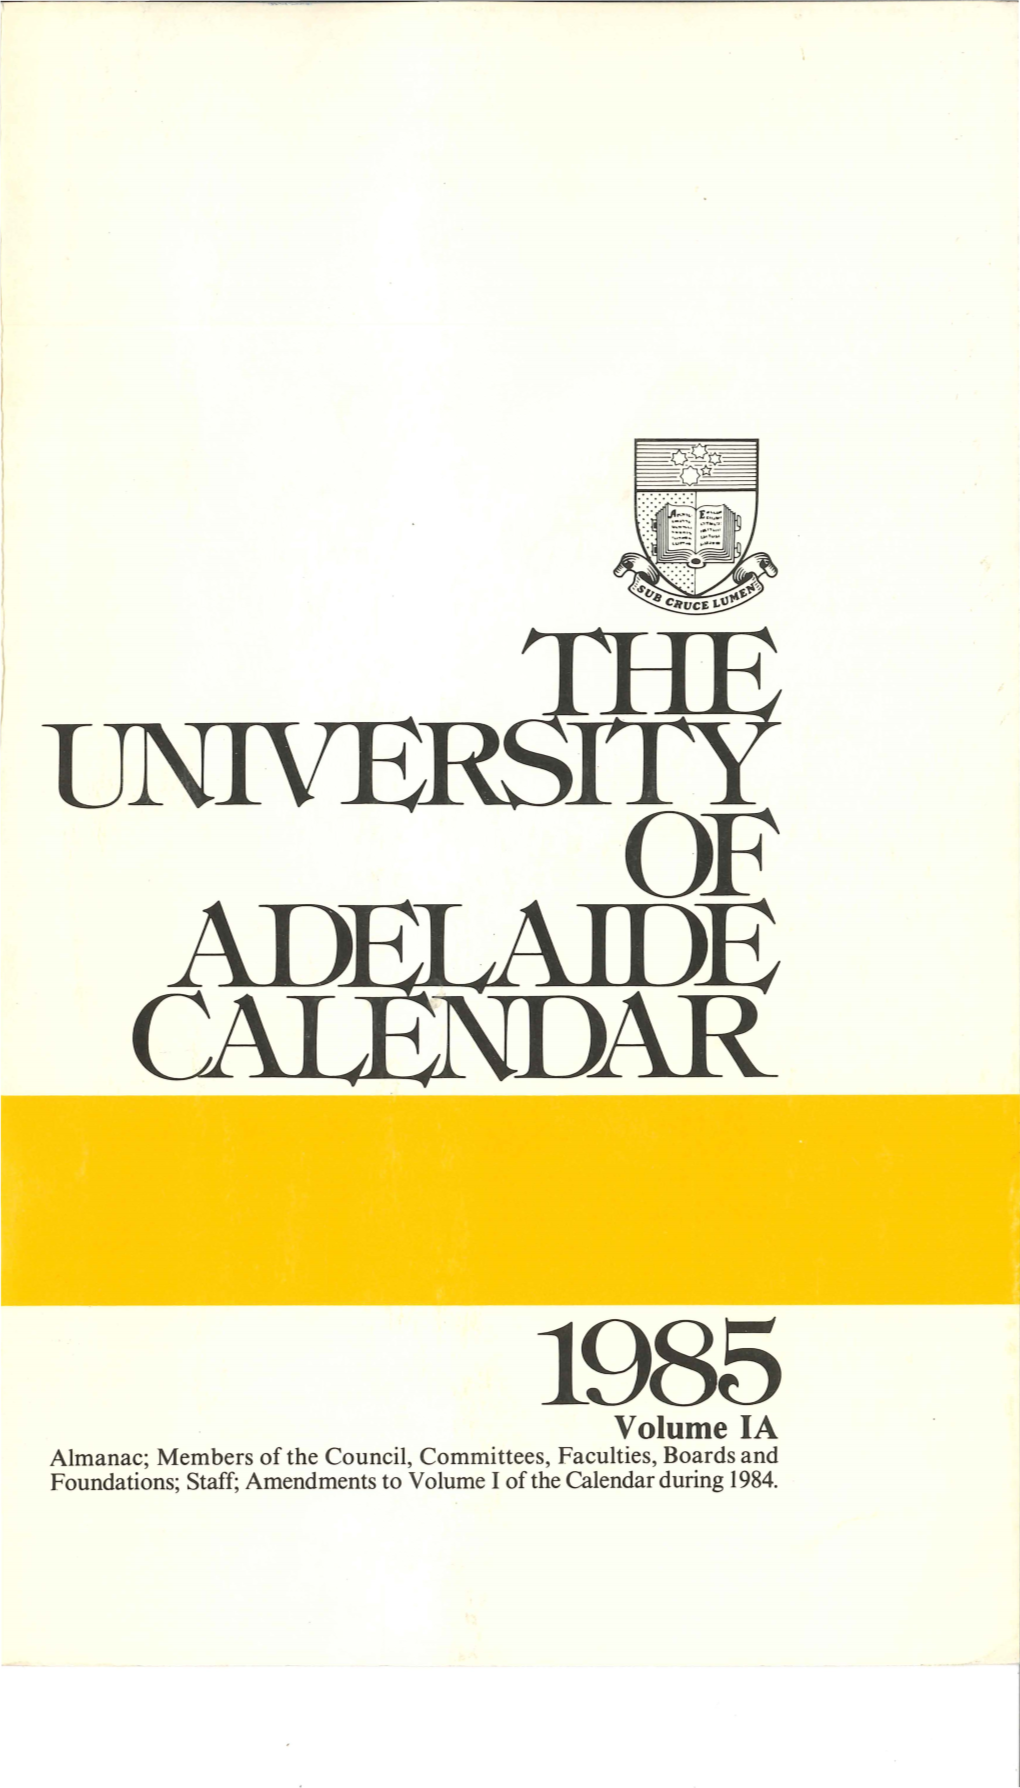 Volume IA Almanac; Members of the Council, Committees, Faculties, Boards and Foundations; Staff; Amendments to Volume I of the Calendar During I 984